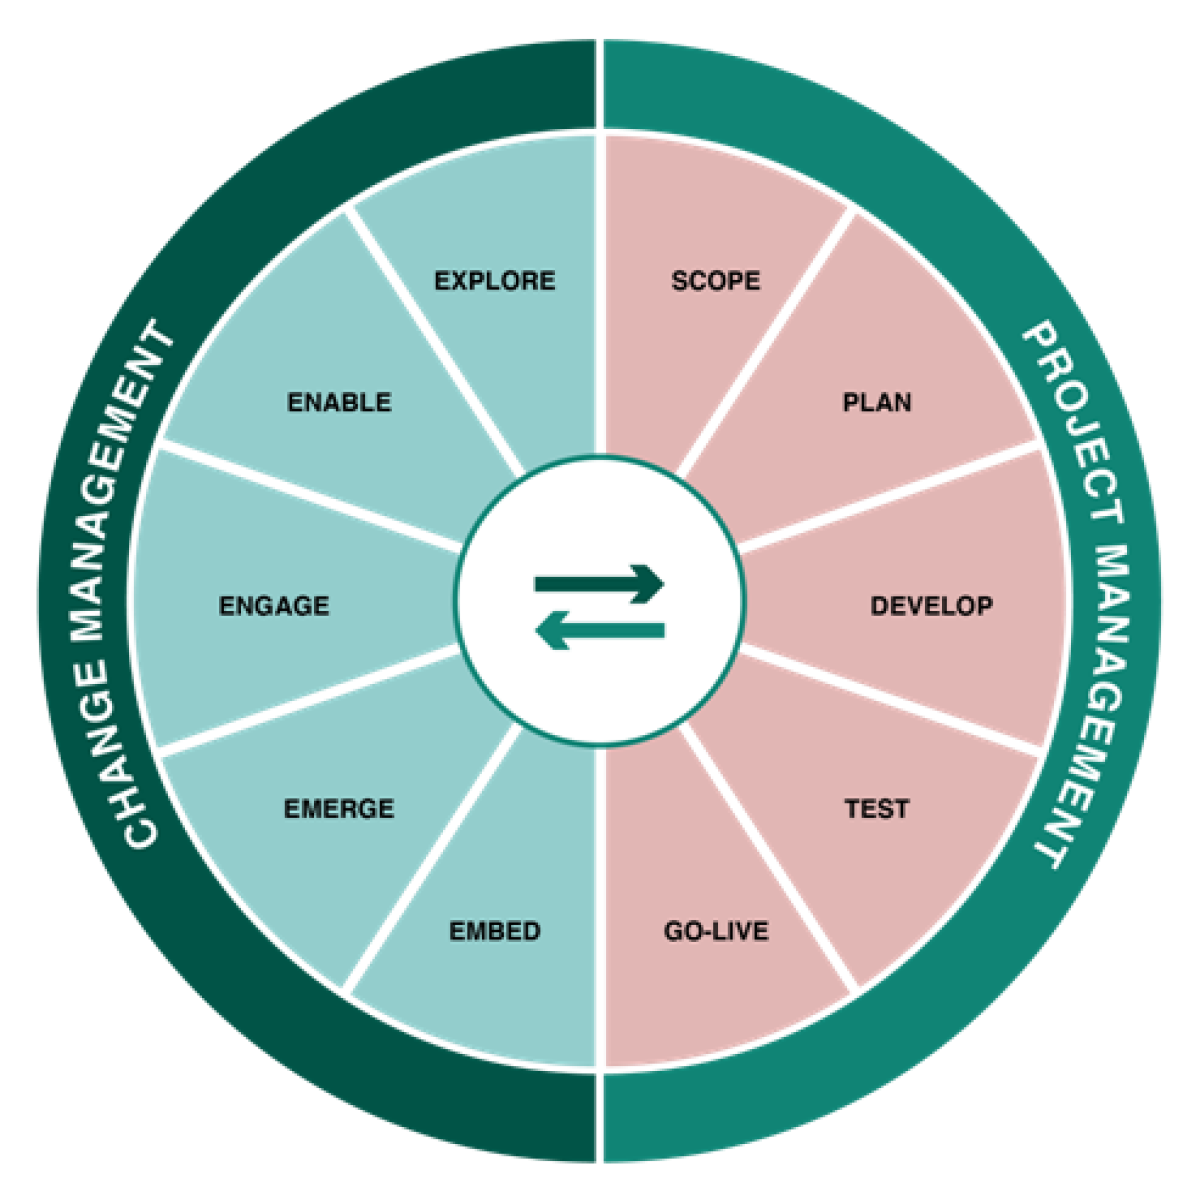 CML 5Es Methodology aligned to a project management lifecycle. This used as part of designing the Change Management Office